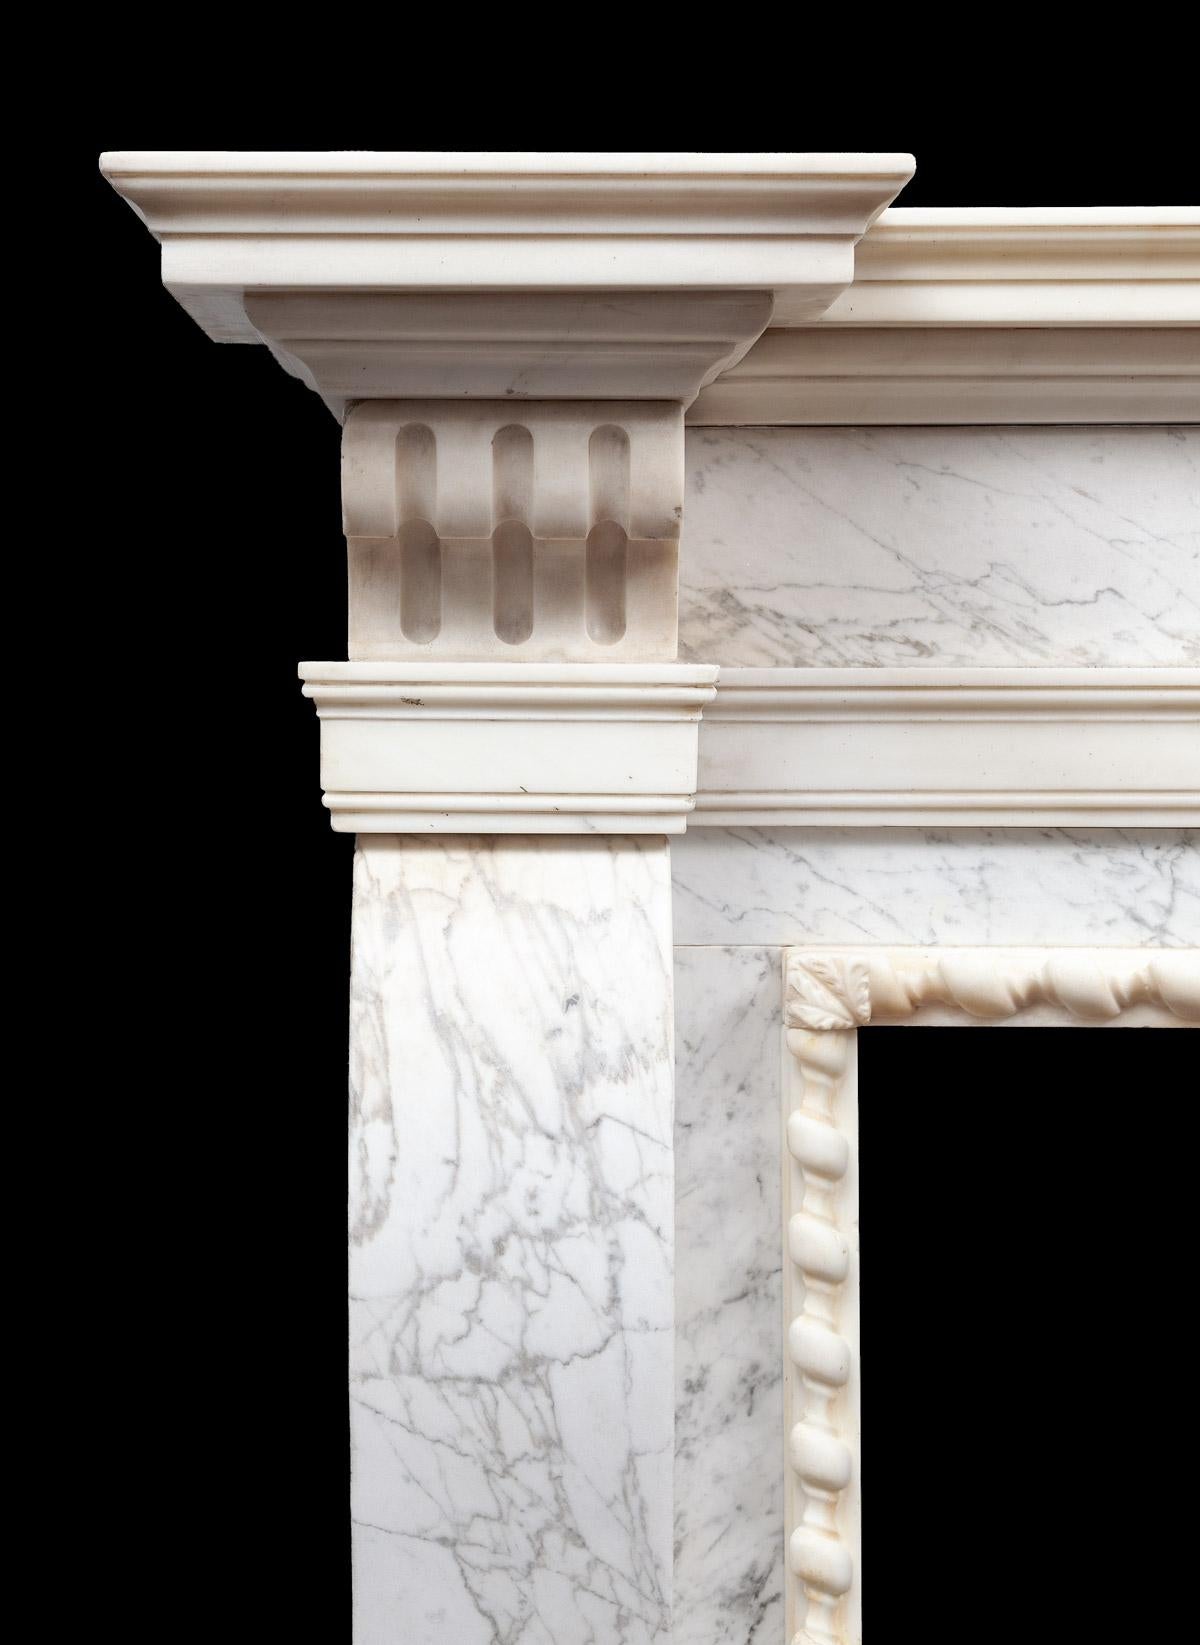 Made from veined Carrara marble and white statuary marble.

The centre plaque with a well carved mask of Apollo surrounded by a sunburst. The console jambs are under fluted corbels and a break-fronted mantel shelf,

circa 1735

Apollo

The